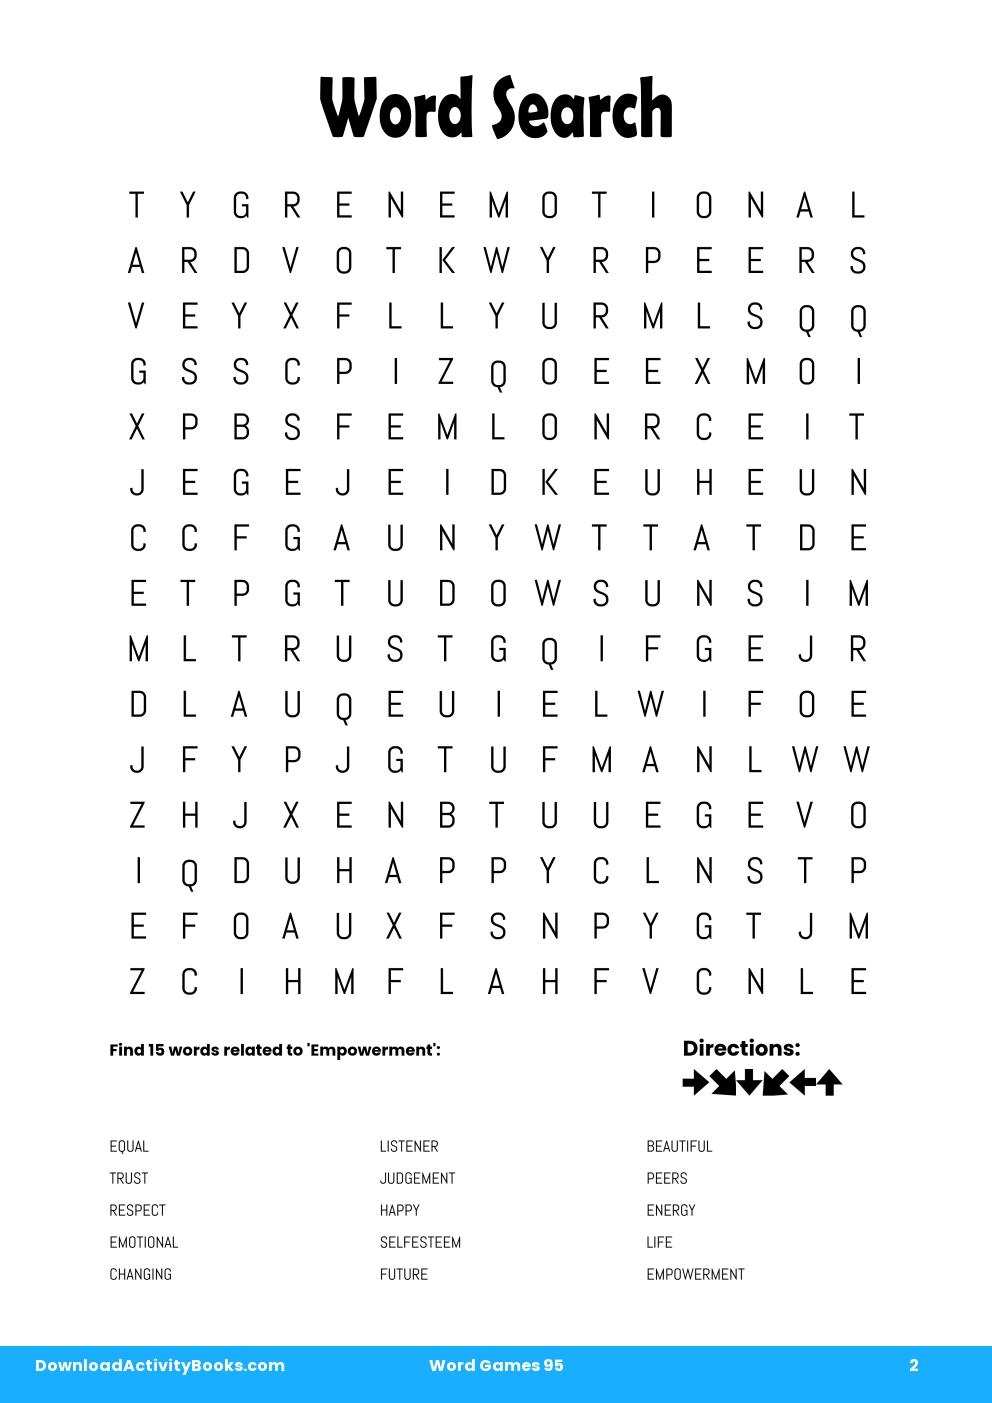 Word Search in Word Games 95